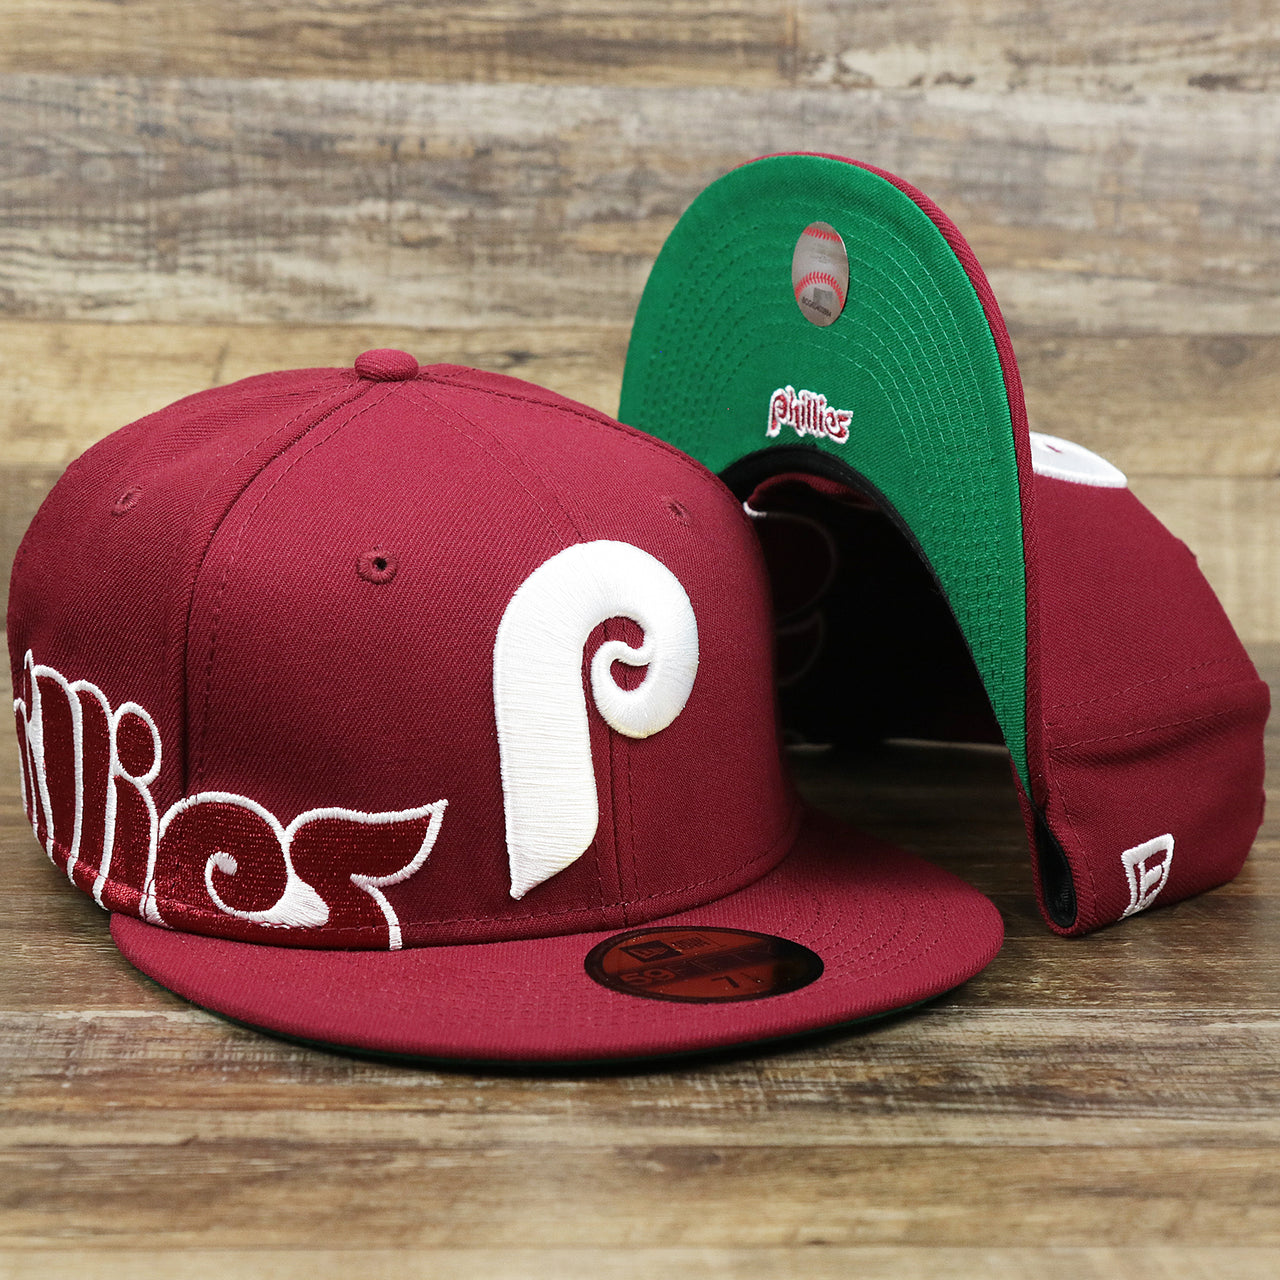 The Cooperstown Philadelphia Phillies Wordmark Side Split Vintage Green Bottom With Phillies Embroidered Undervisor Fitted Cap | Maroon Blue 59Fifty Cap